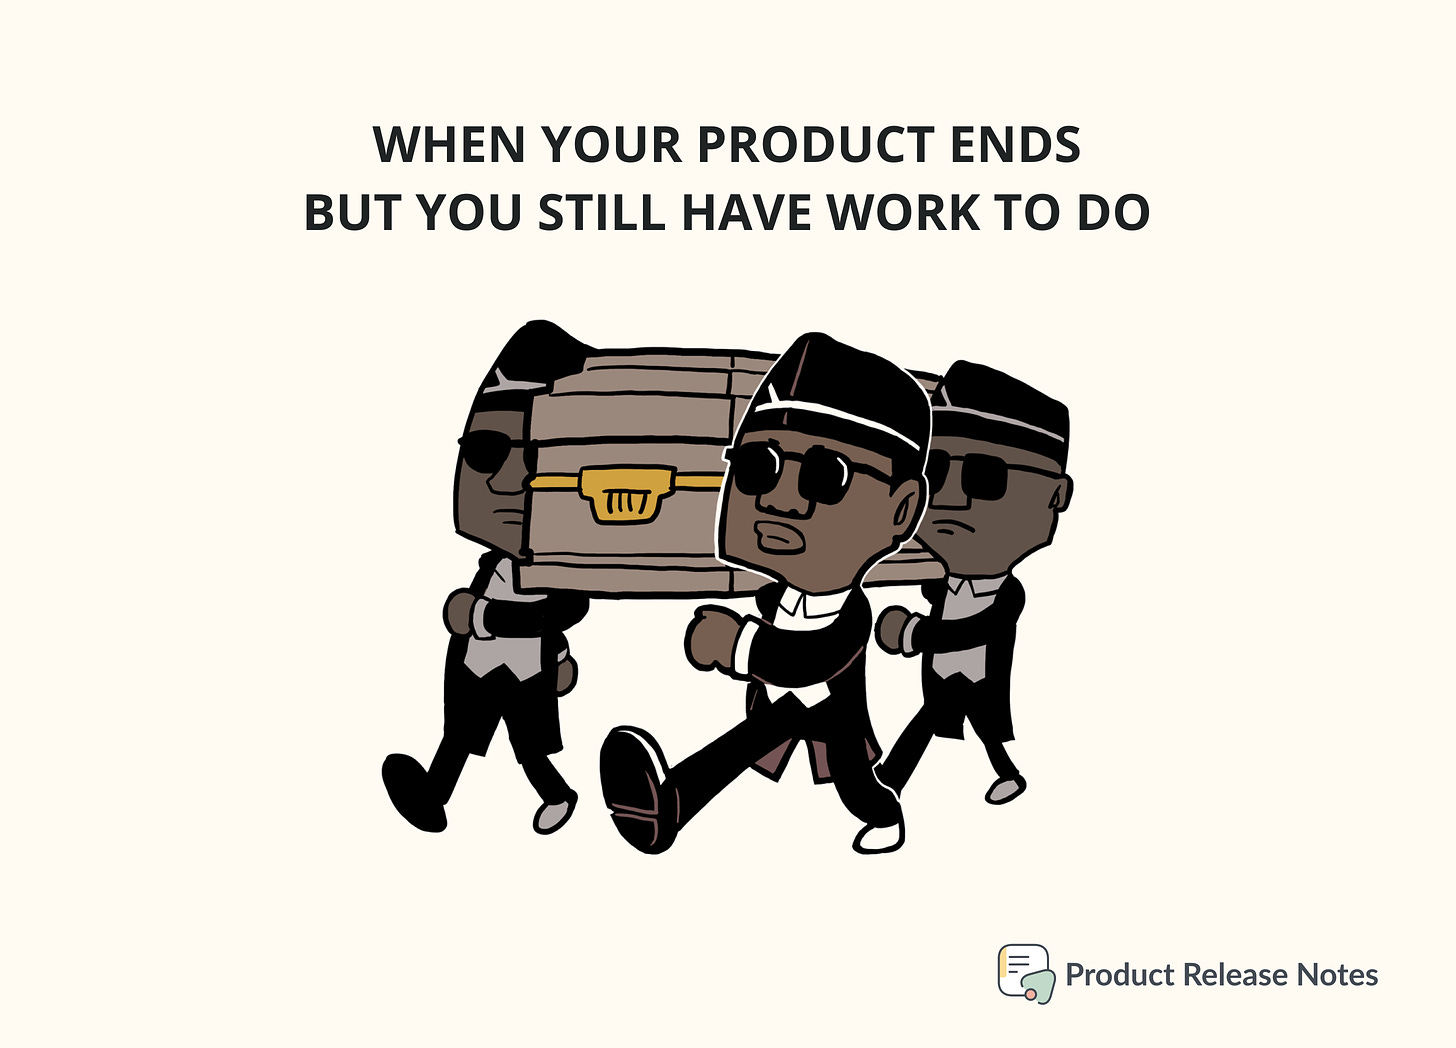 When your product ends but you still have work to do